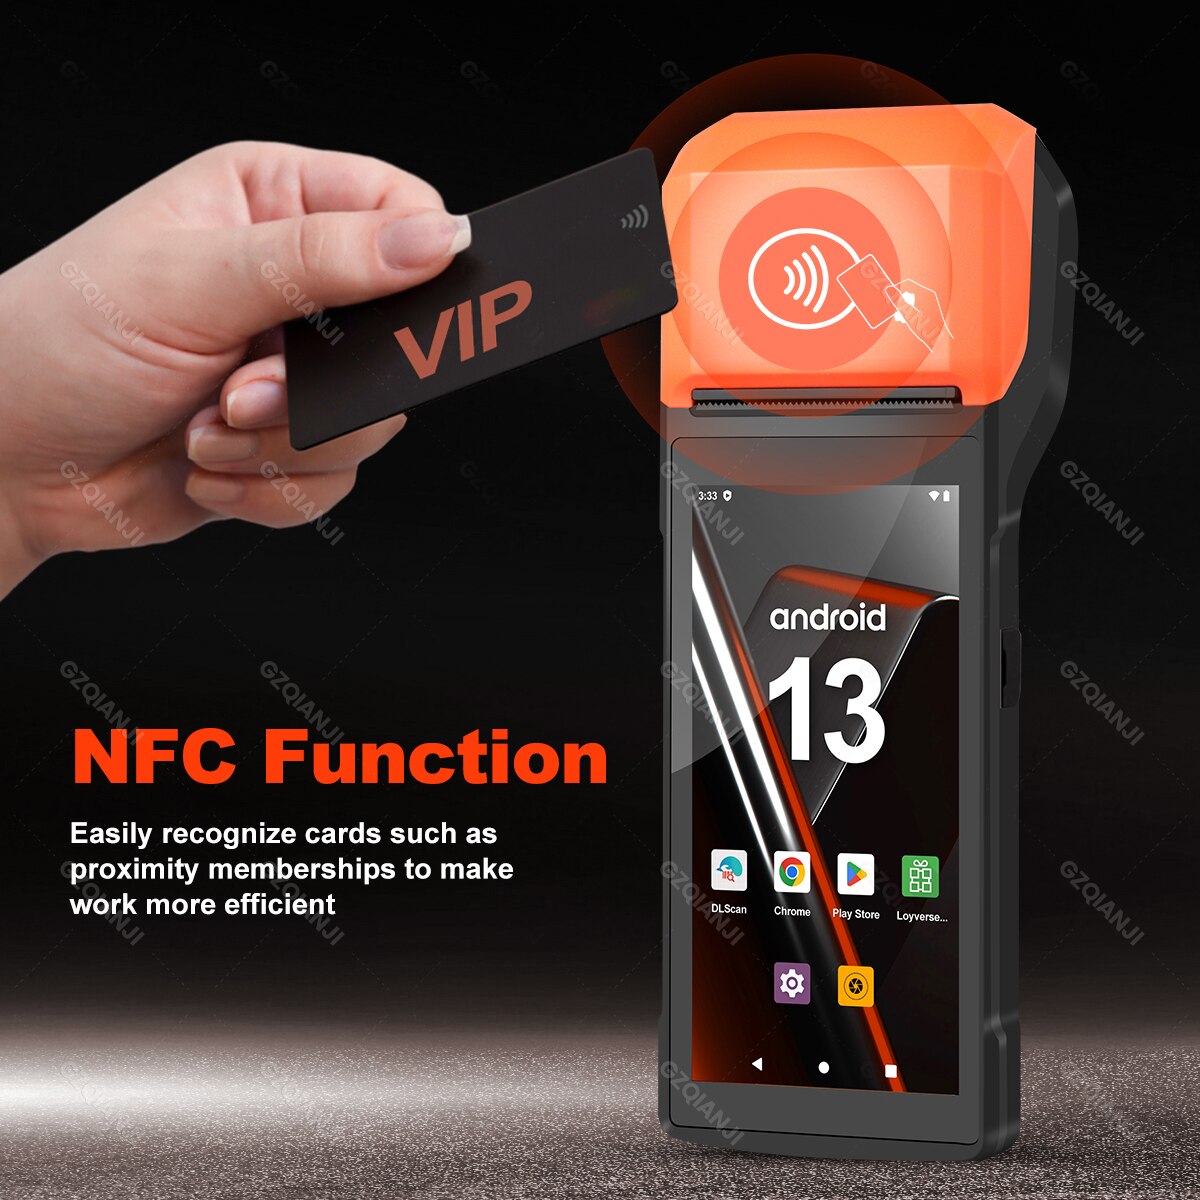 New 4G Wireless Wifi Handheld PDA Printers Android 8.1 13 POS Terminal Touch Screen Built-in 2D Barcode Scanner NFC Card Reader